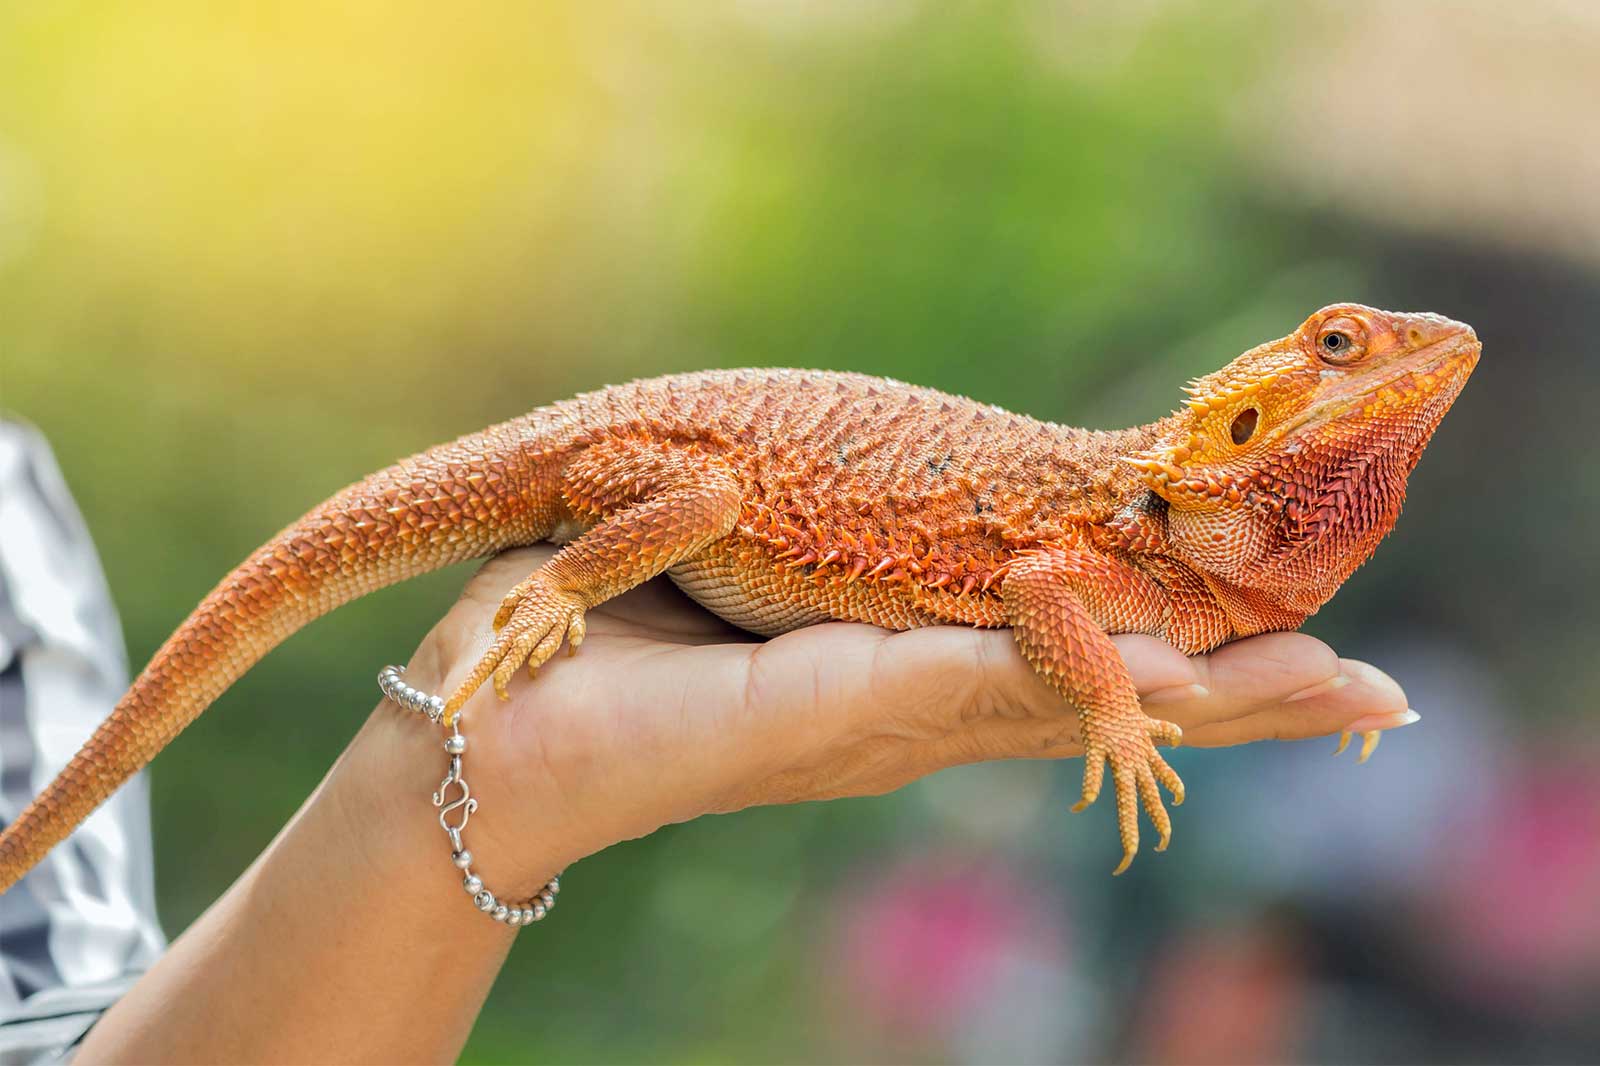 "How to Choose the Right Reptile for Your Home"